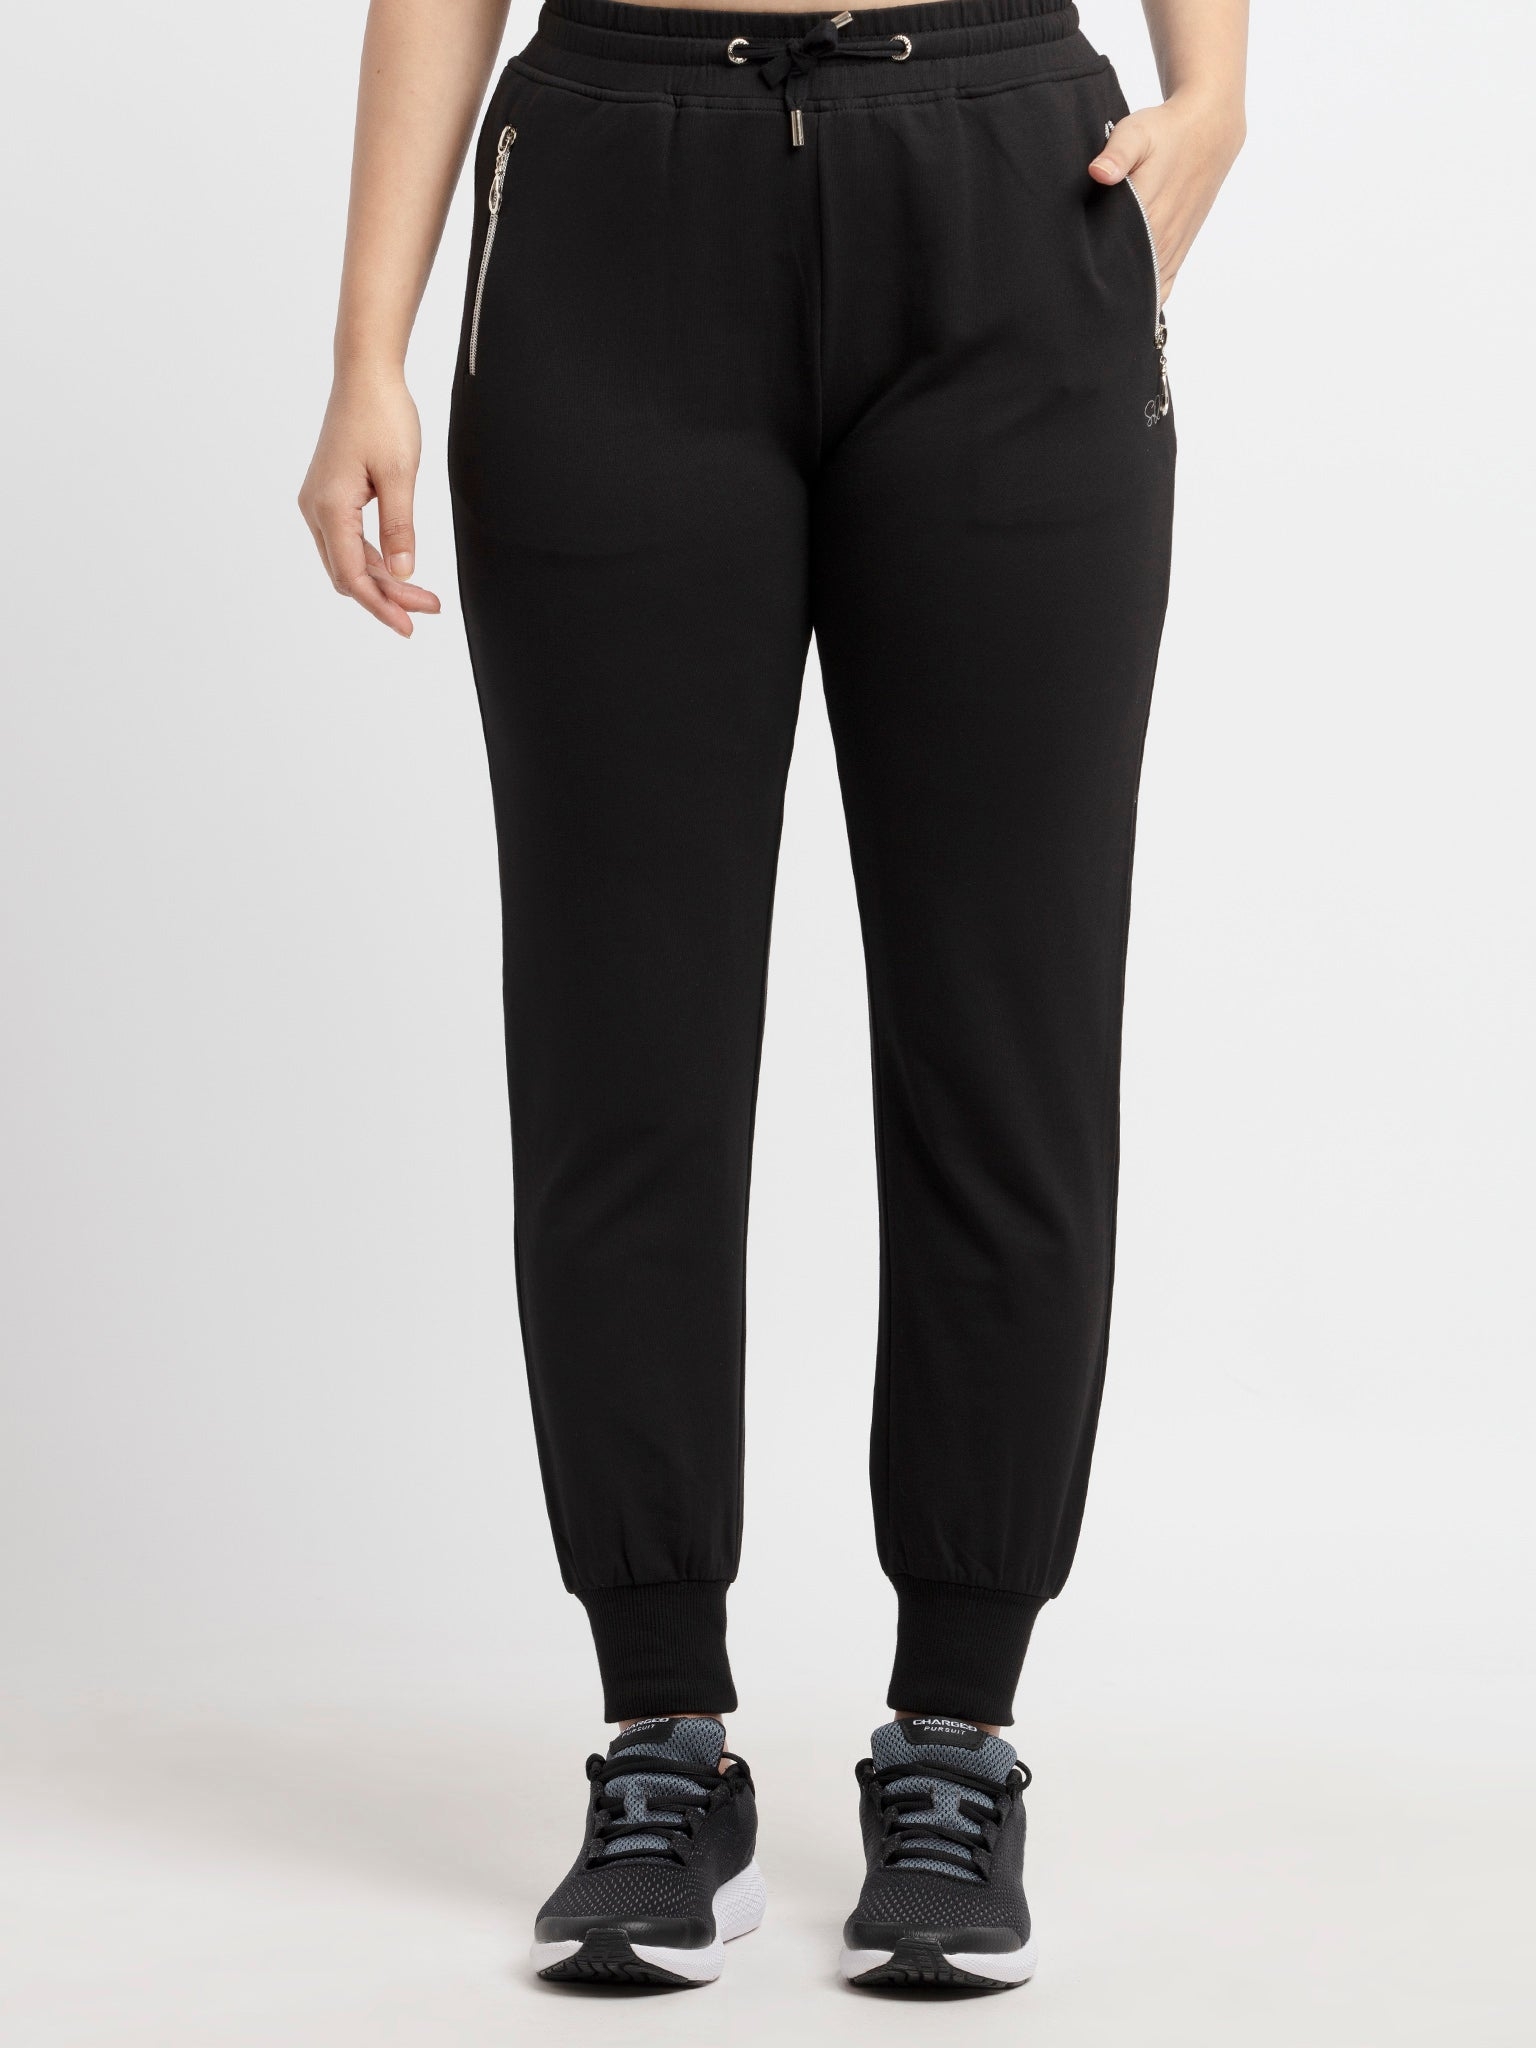 Women'ss Ankle length Solid Joggers